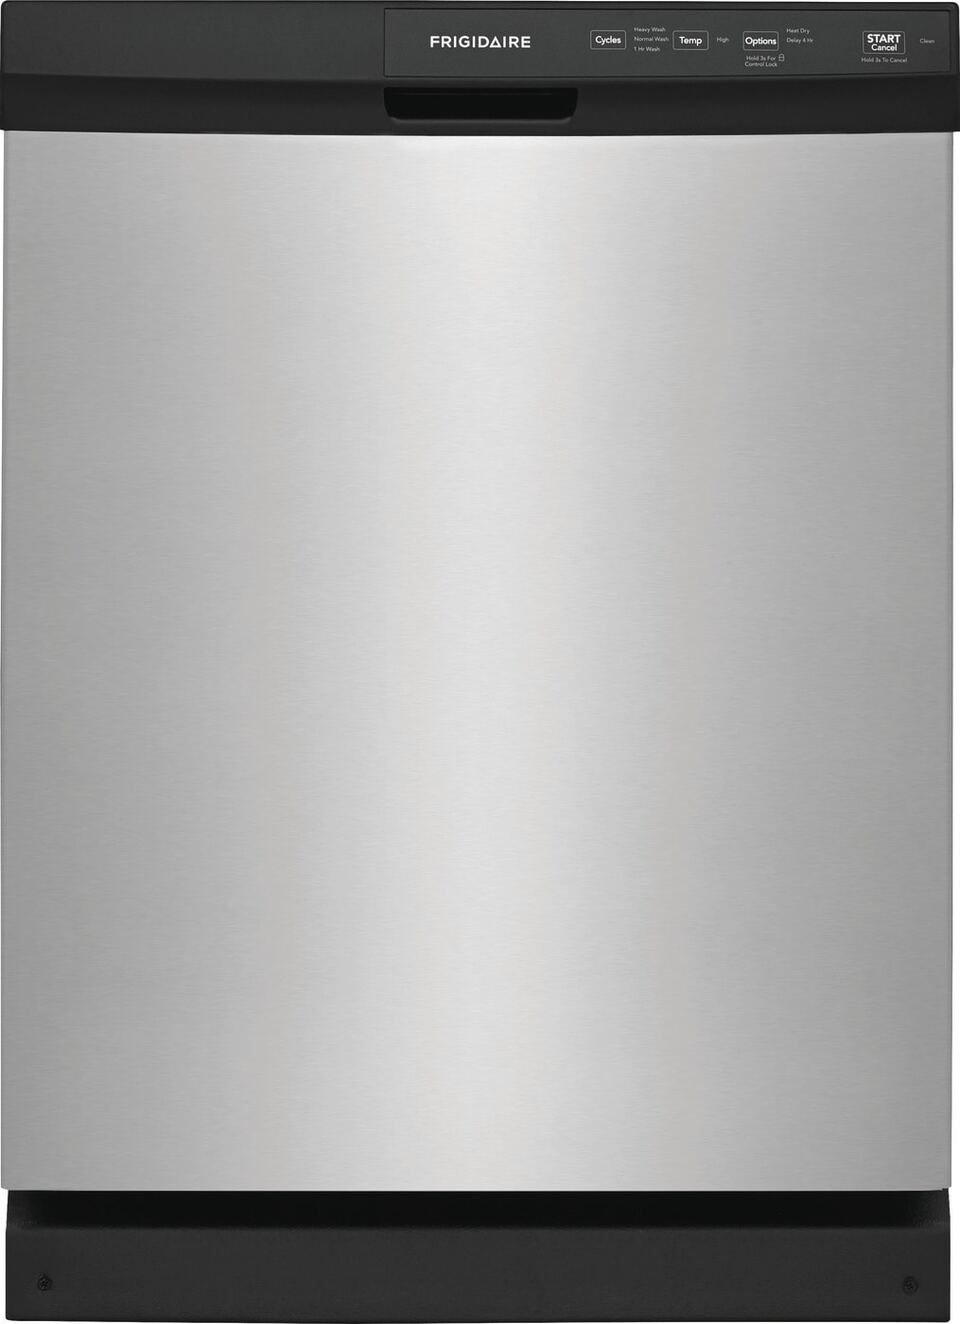 Frigidaire FFCD2413US 24 Inch Built-In Dishwasher in Stainless Steel 